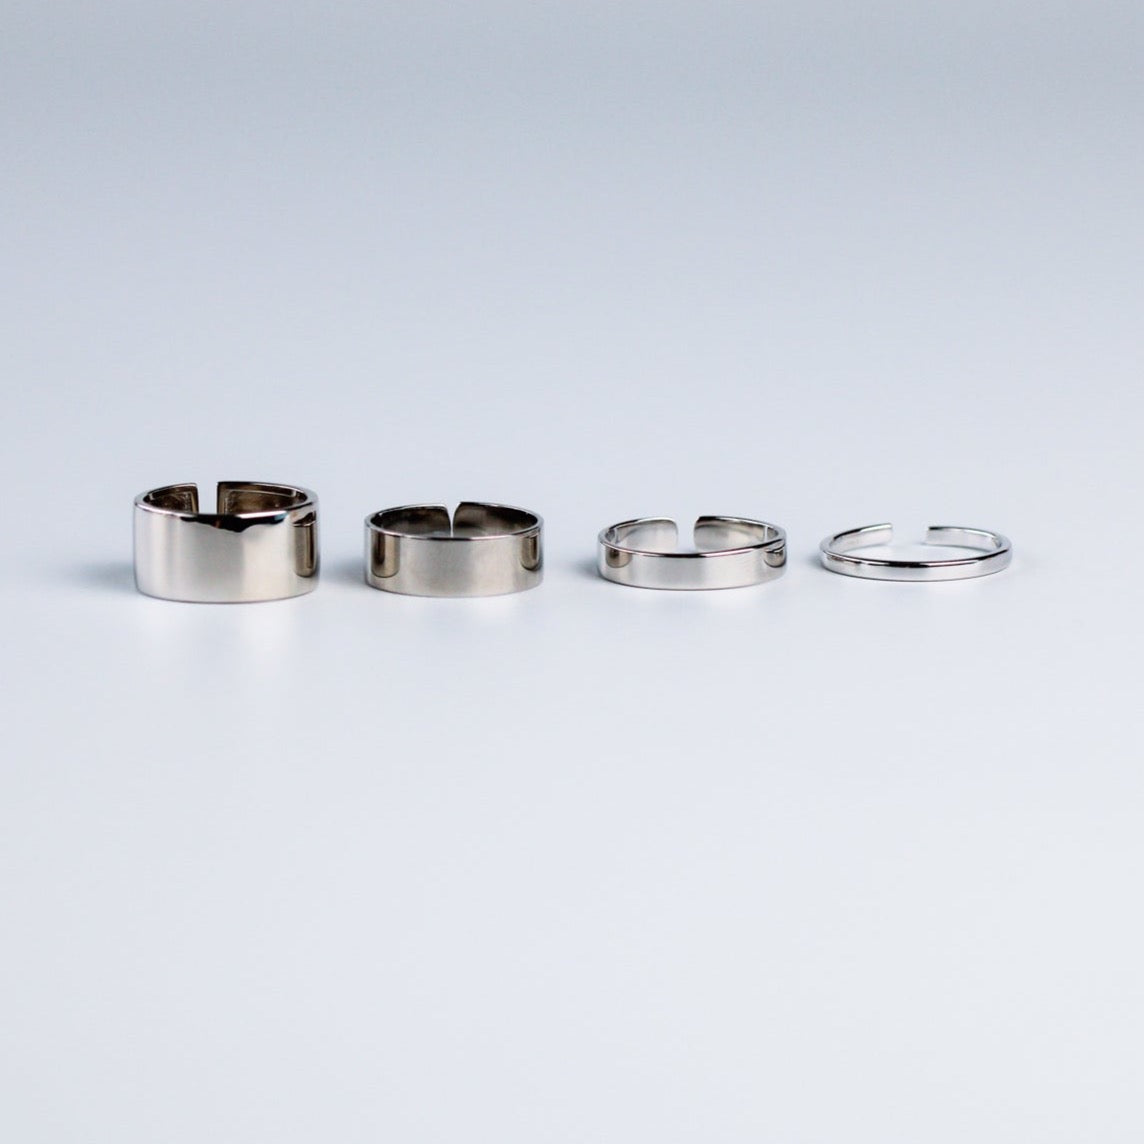 Simple Flat Band Adjustable Ring